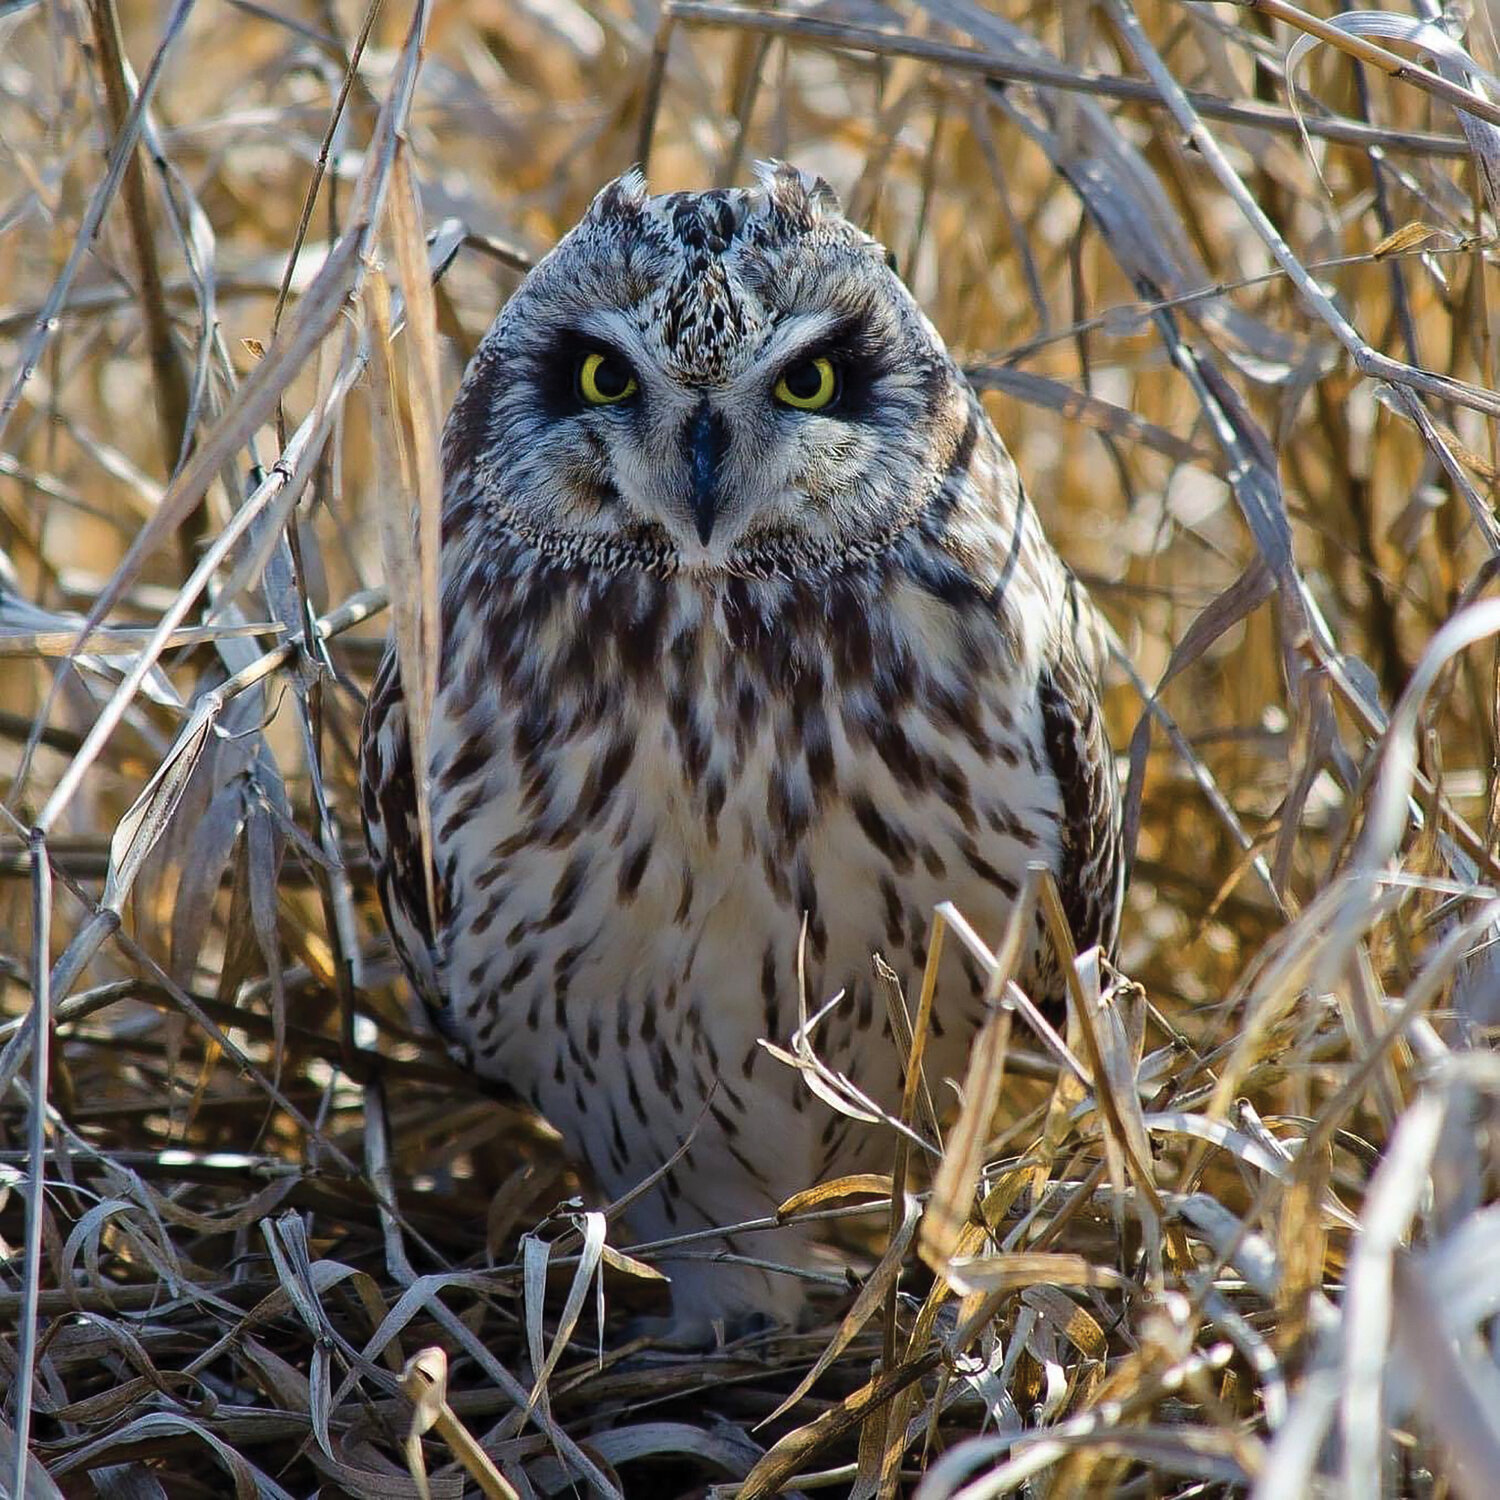 Wayne Lindberg of Battle Ground submitted this photo of a short-eared owl taking a gander around at the Ridgefield Wildlife Refuge recently. Do you have a photo you have taken that you would like considered for publication? Email your high-resolution jpg submission, along with your name, city of residence and where and when the photo was taken, to news@thereflector.com.